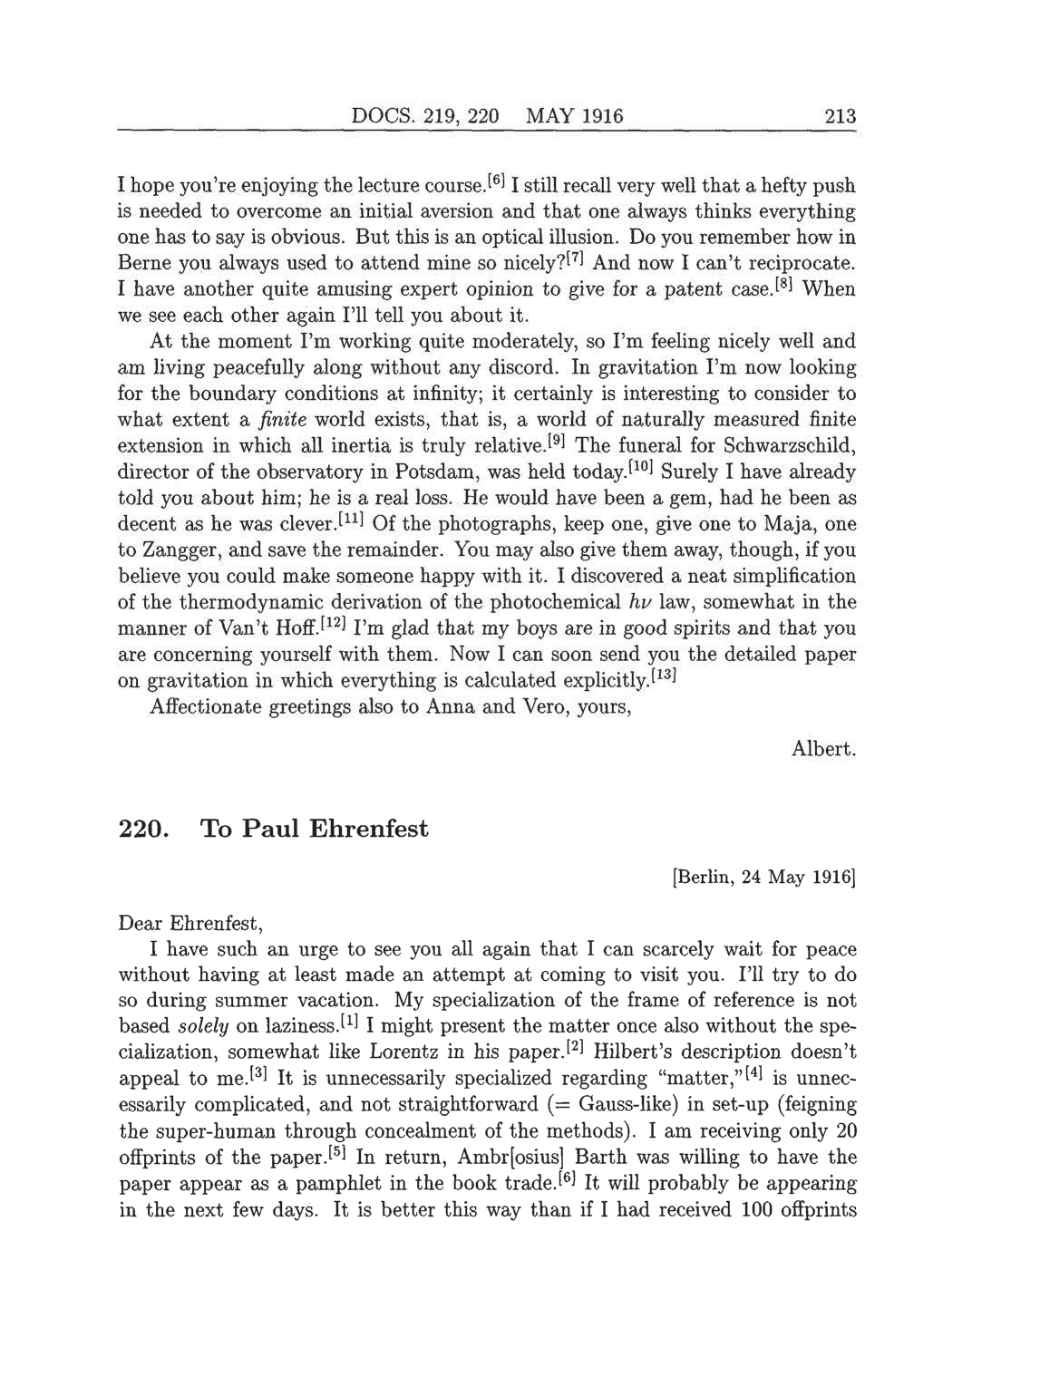 Volume 8: The Berlin Years: Correspondence, 1914-1918 (English translation supplement) page 213